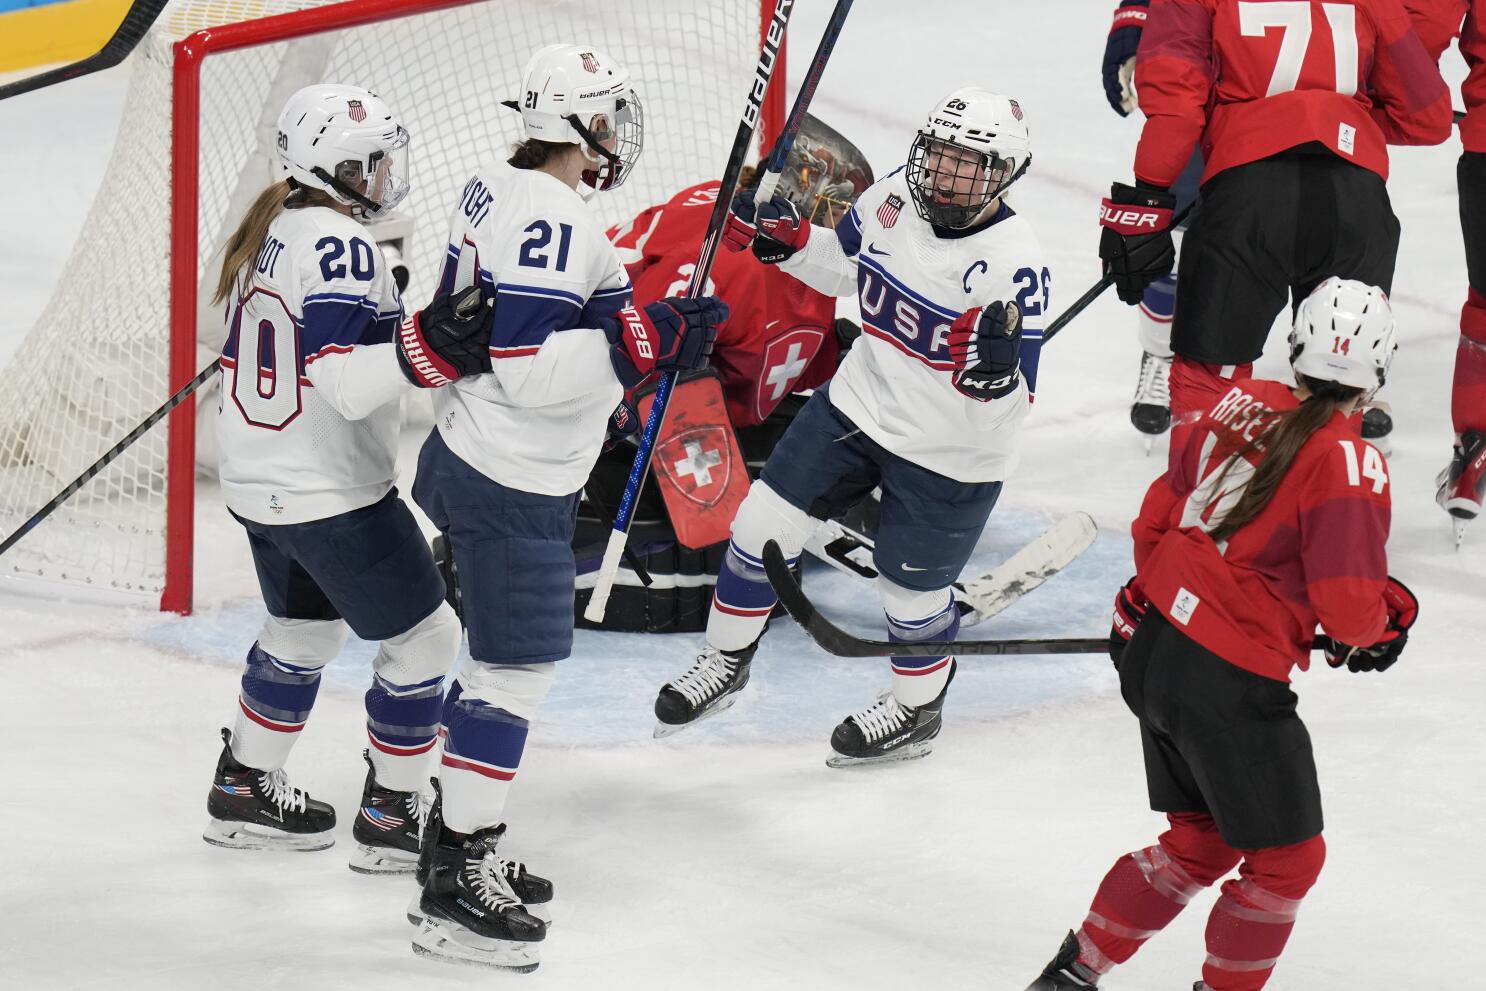 Kendall Coyne Schofield (26) skates with the puck, 2024 Paris Olympics